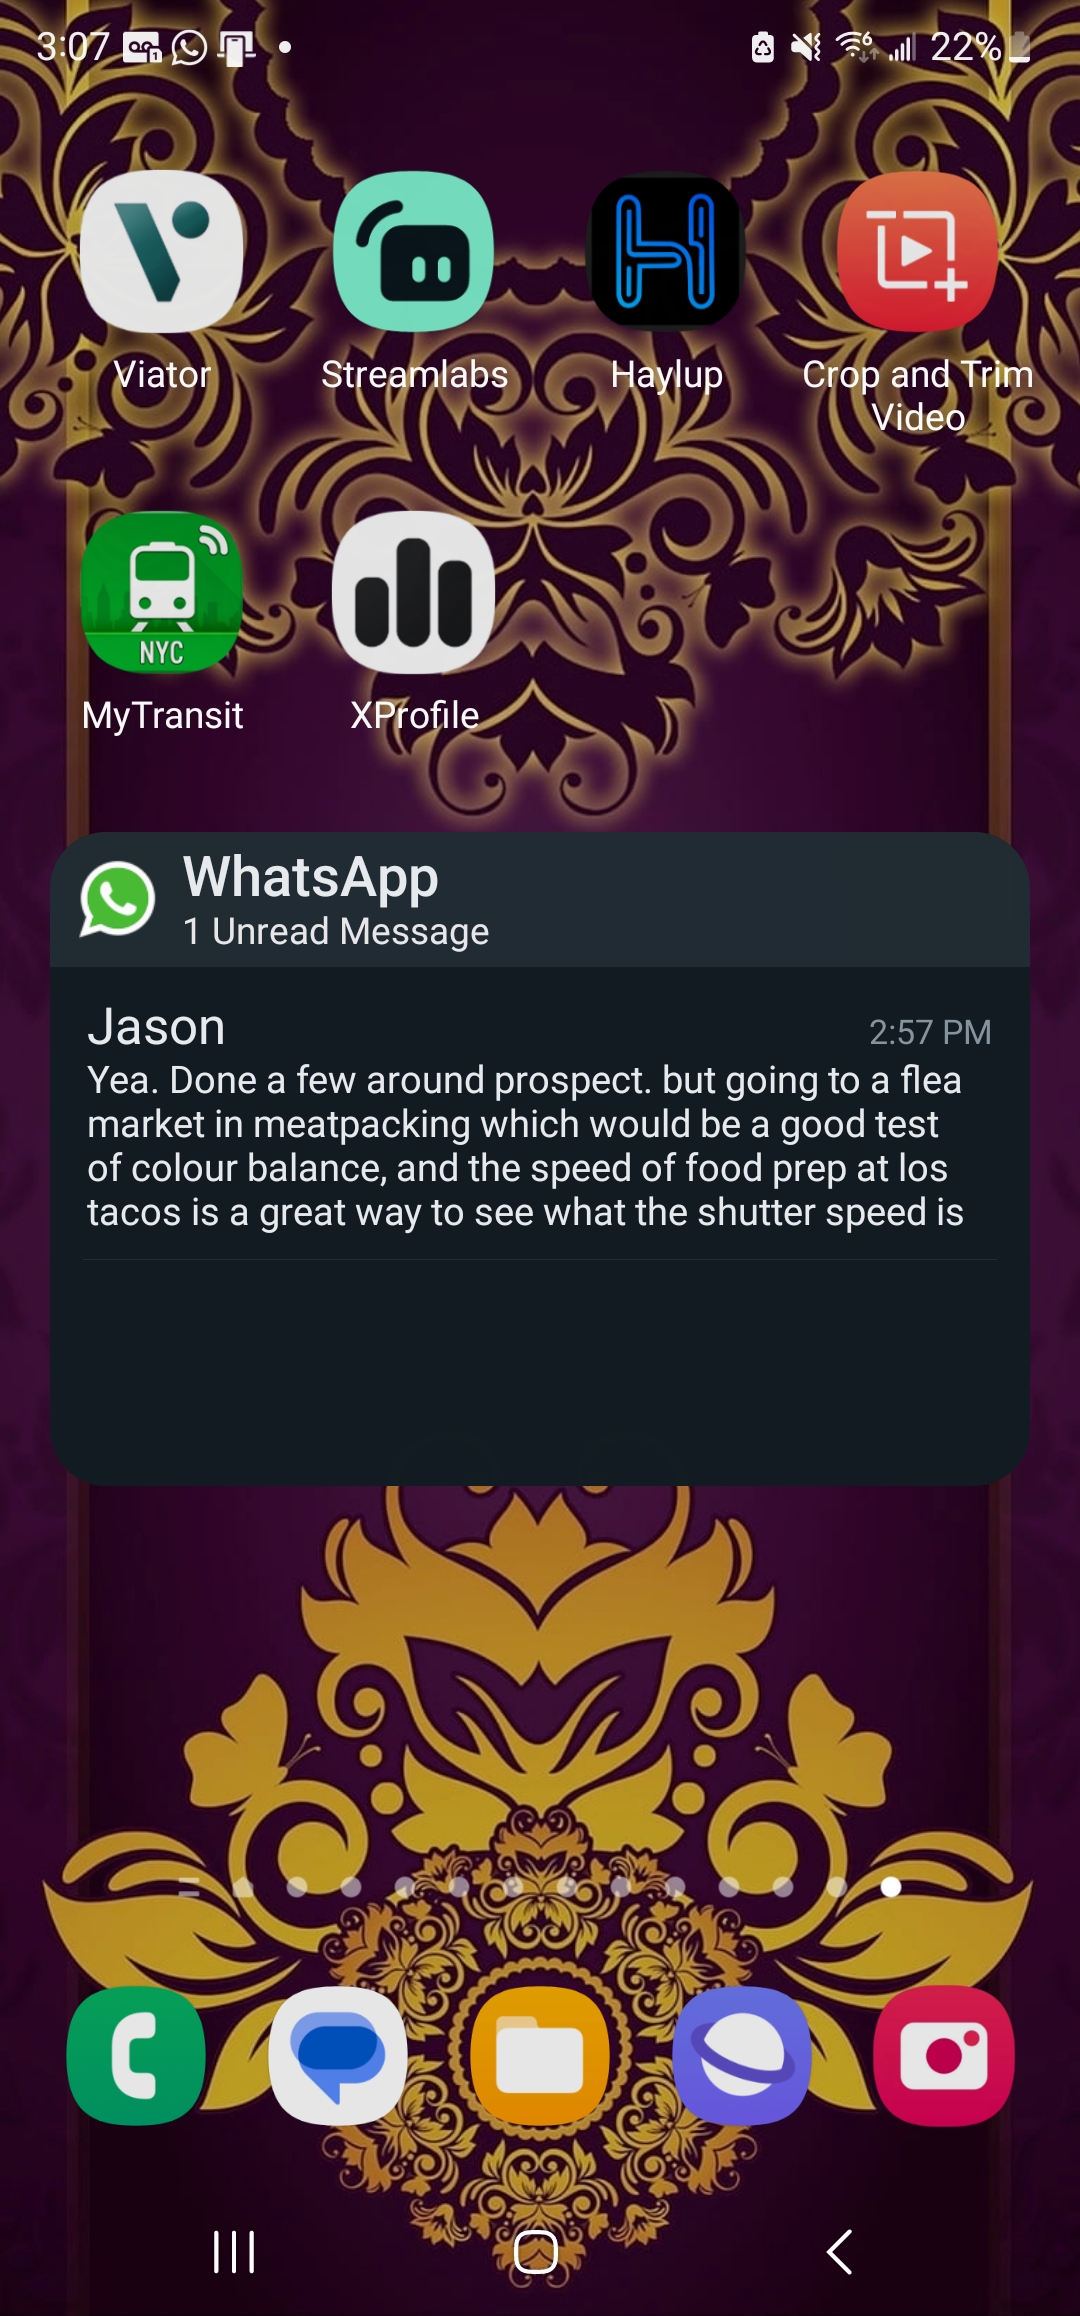 How to read WhatsApp messages without the sender knowing you read them